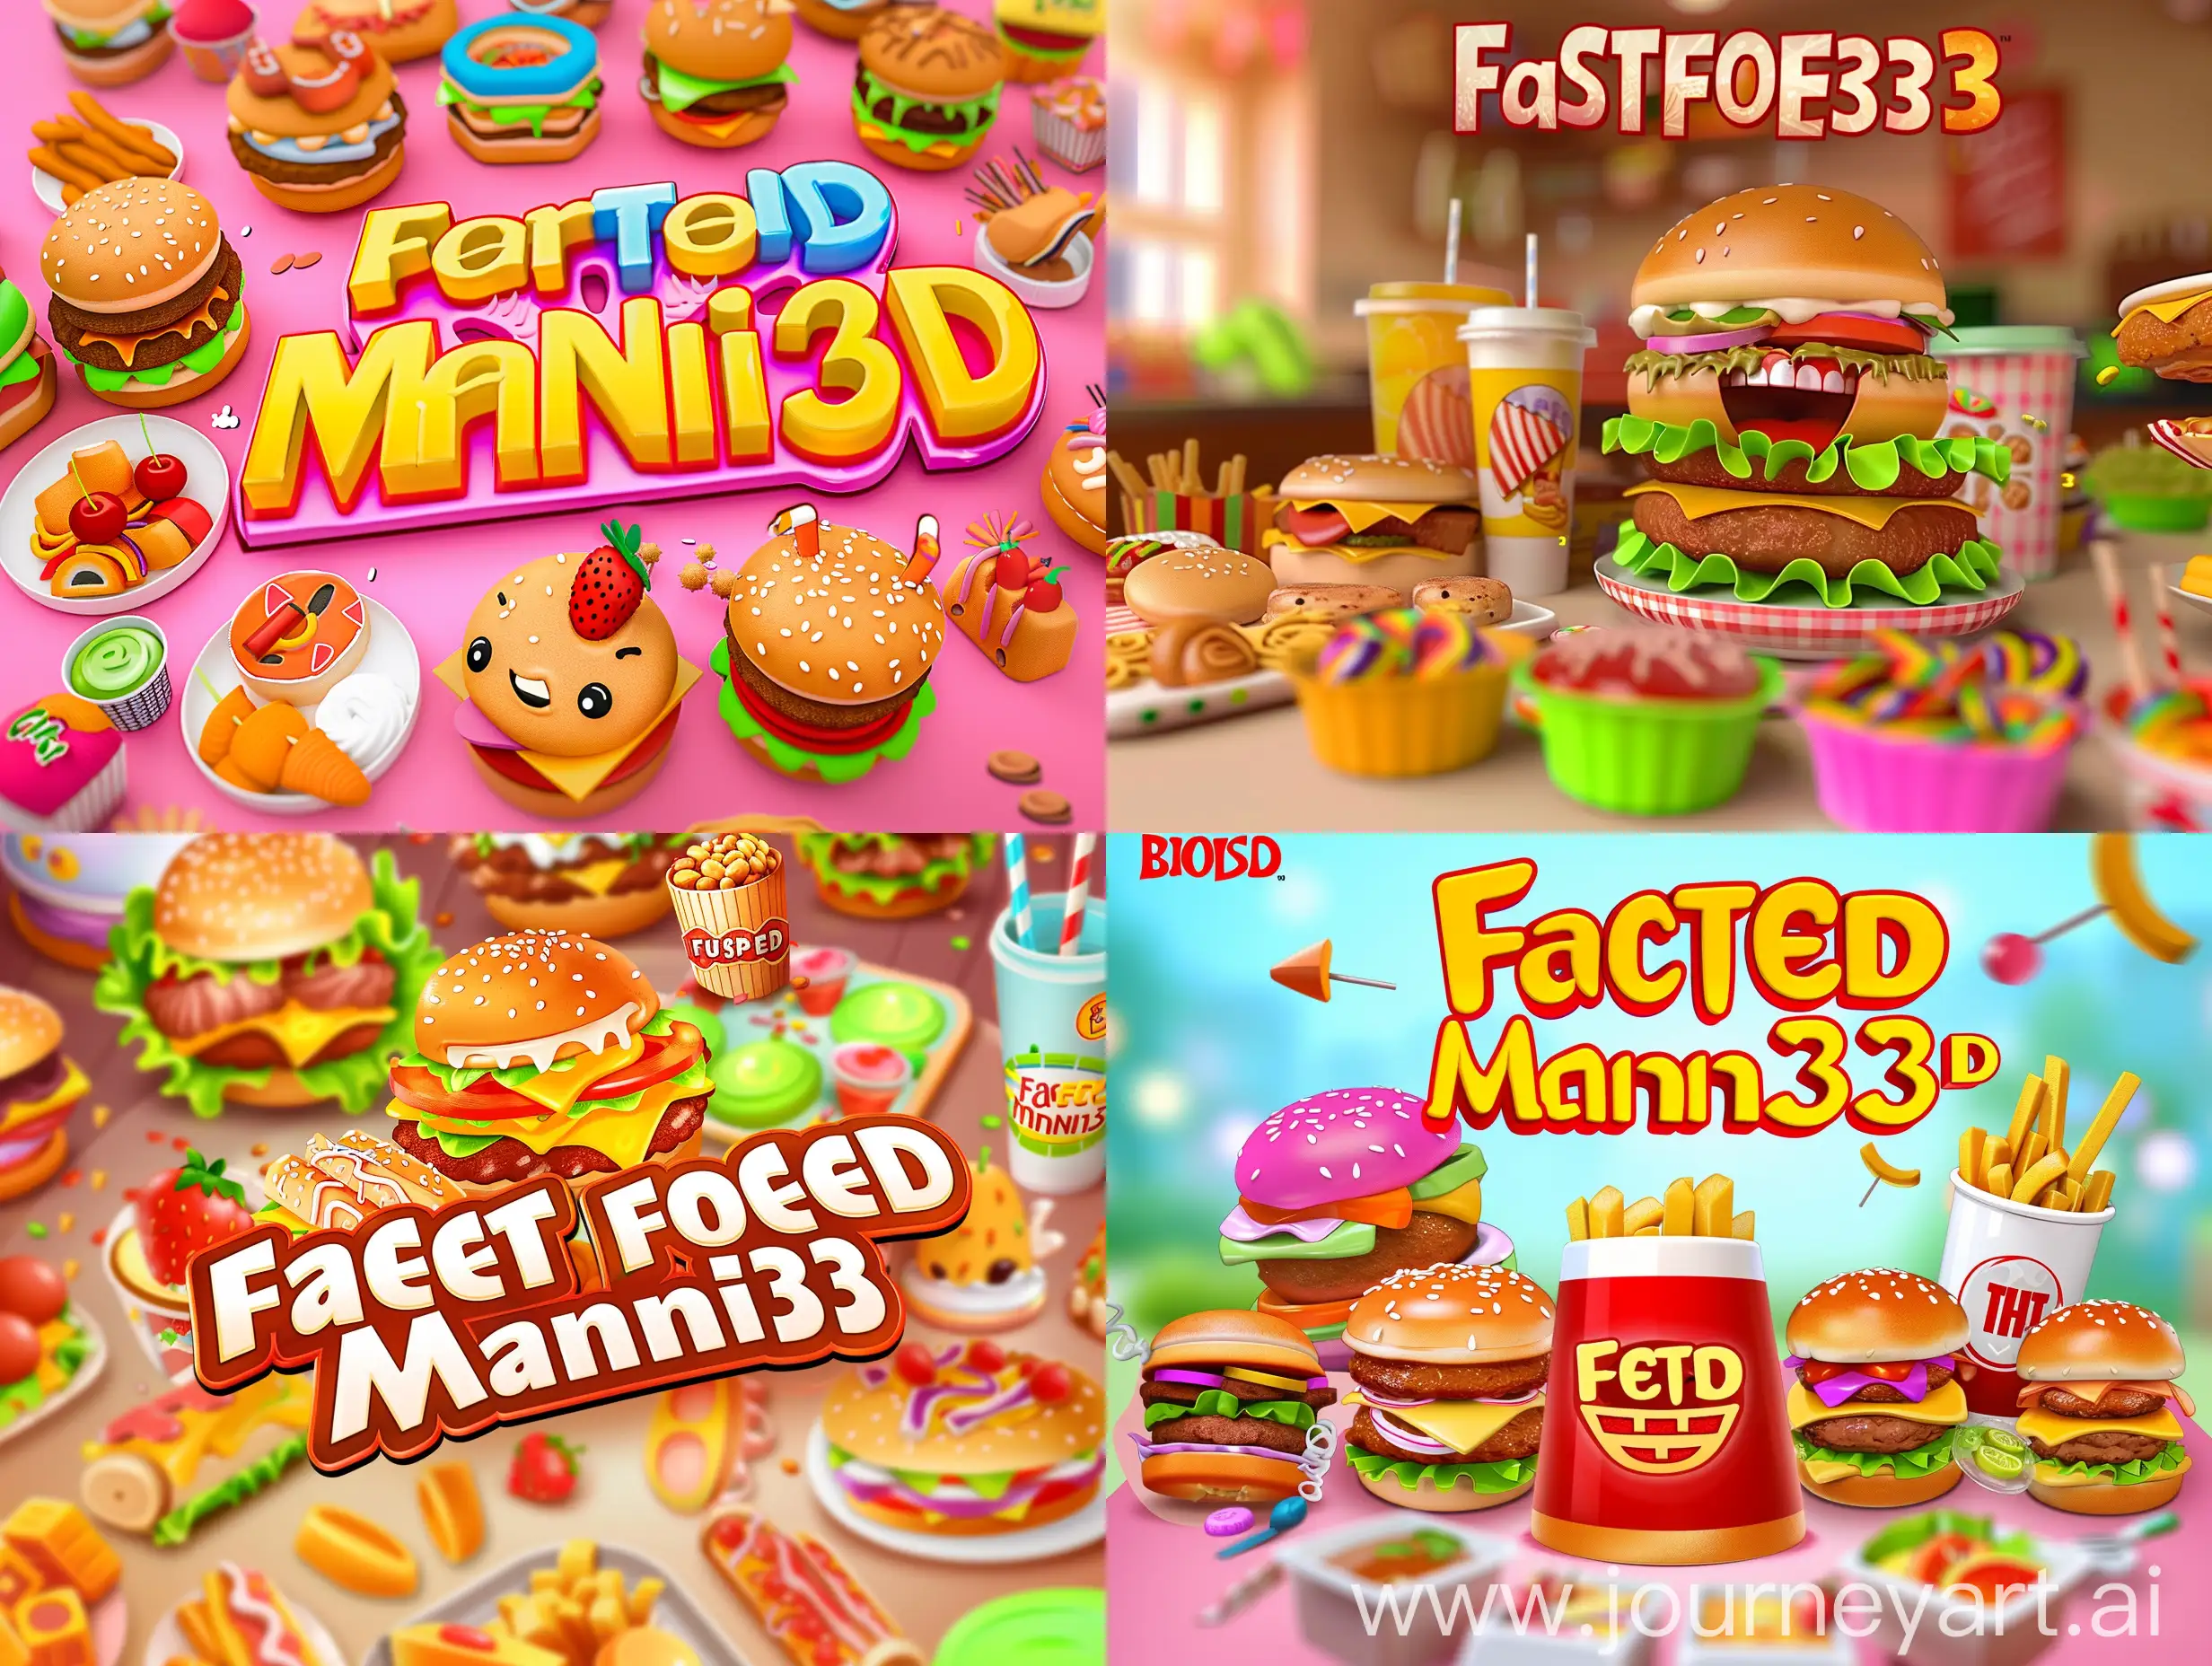 Childrens-Match-3-Game-Cover-Fast-Food-Mania-3D